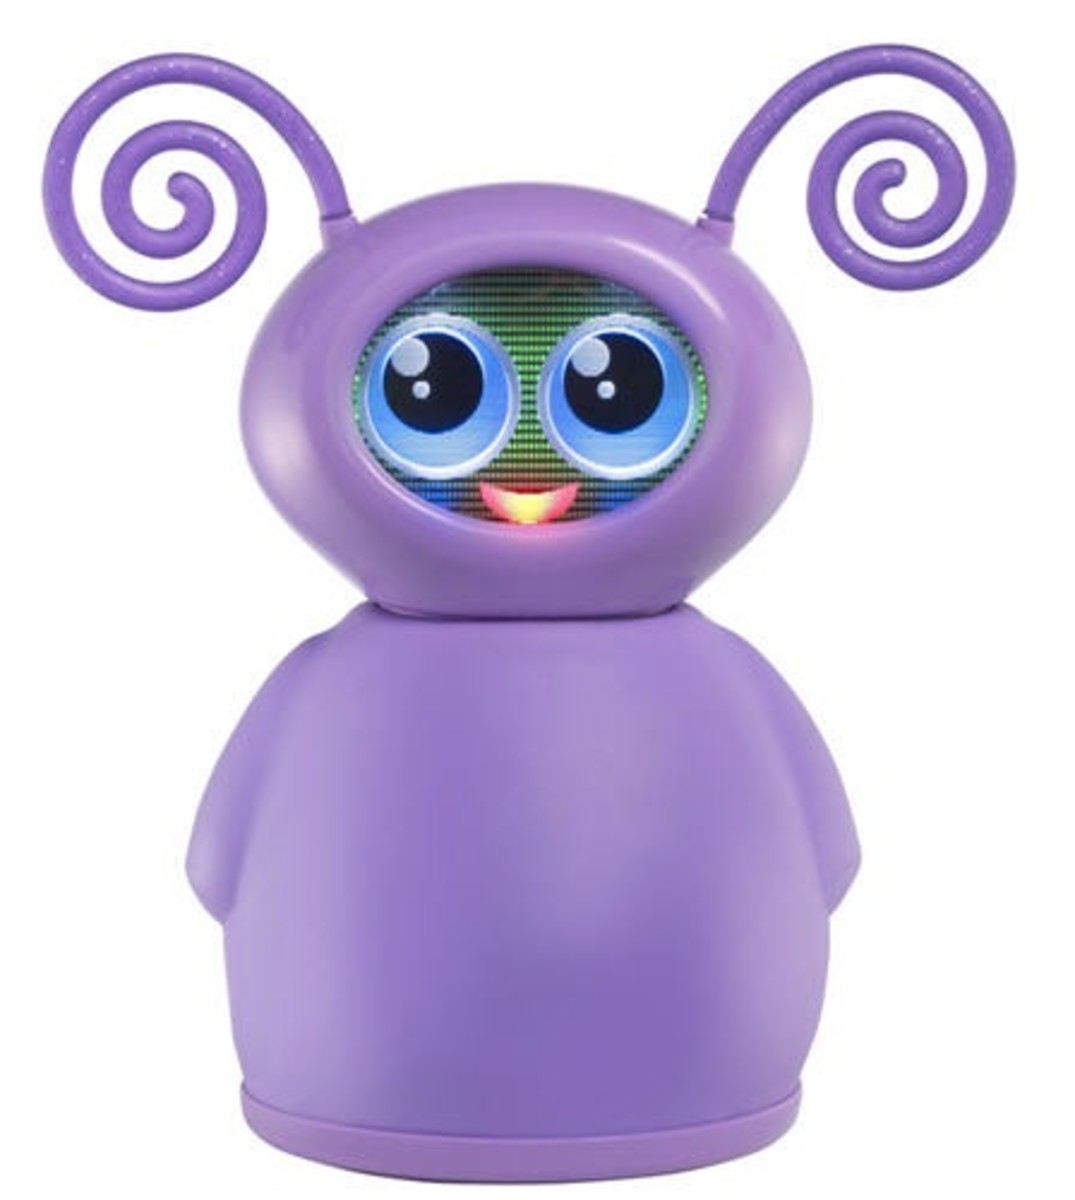 buy-fijit-friends-interactive-toys-online-prices-names-cheapest-deals